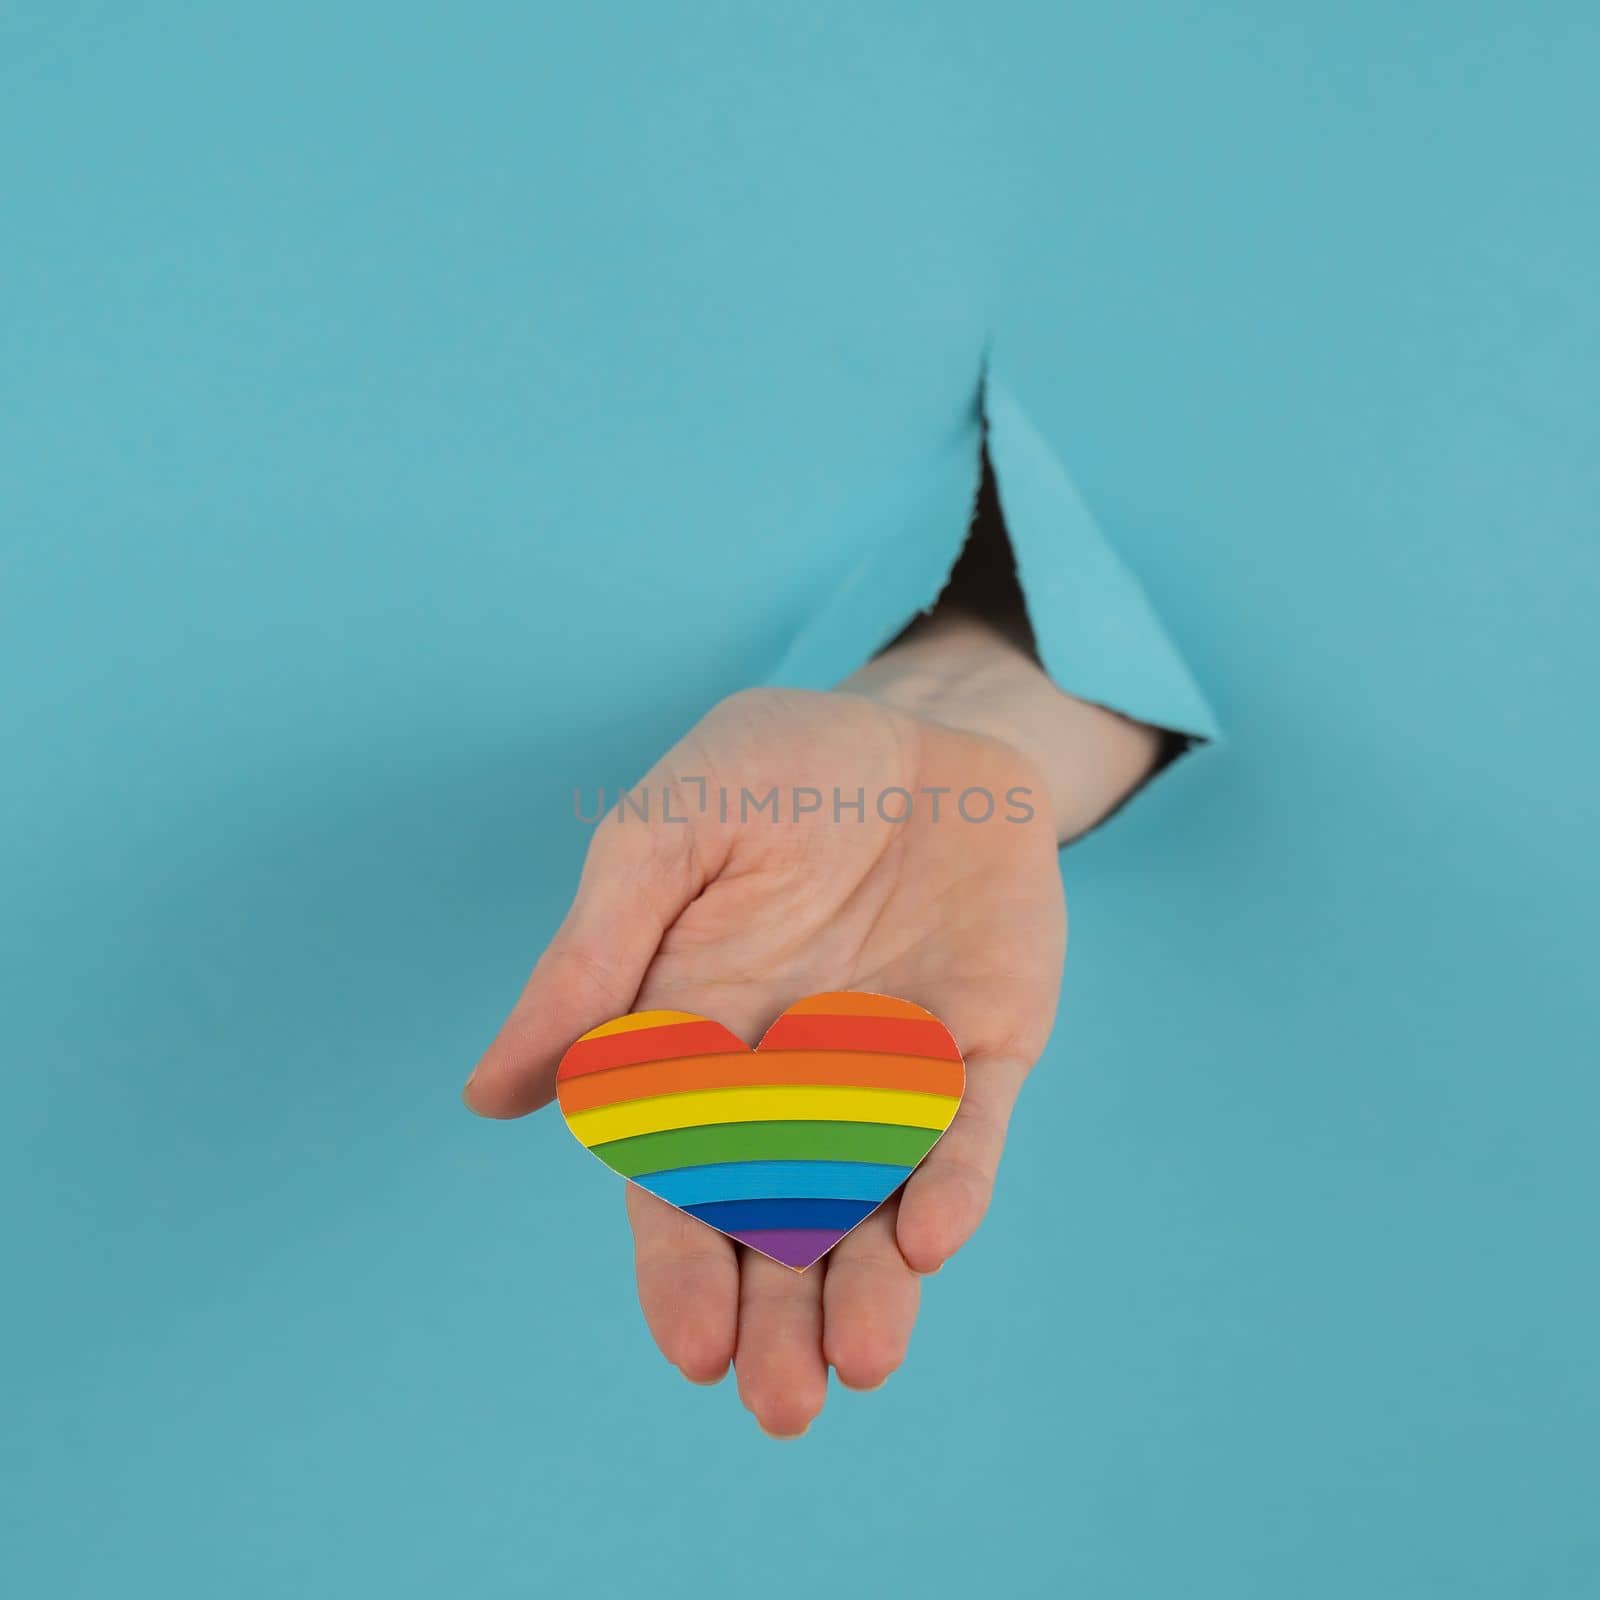 A hand with a rainbow-colored heart sticking out of a hole in a blue cardboard background